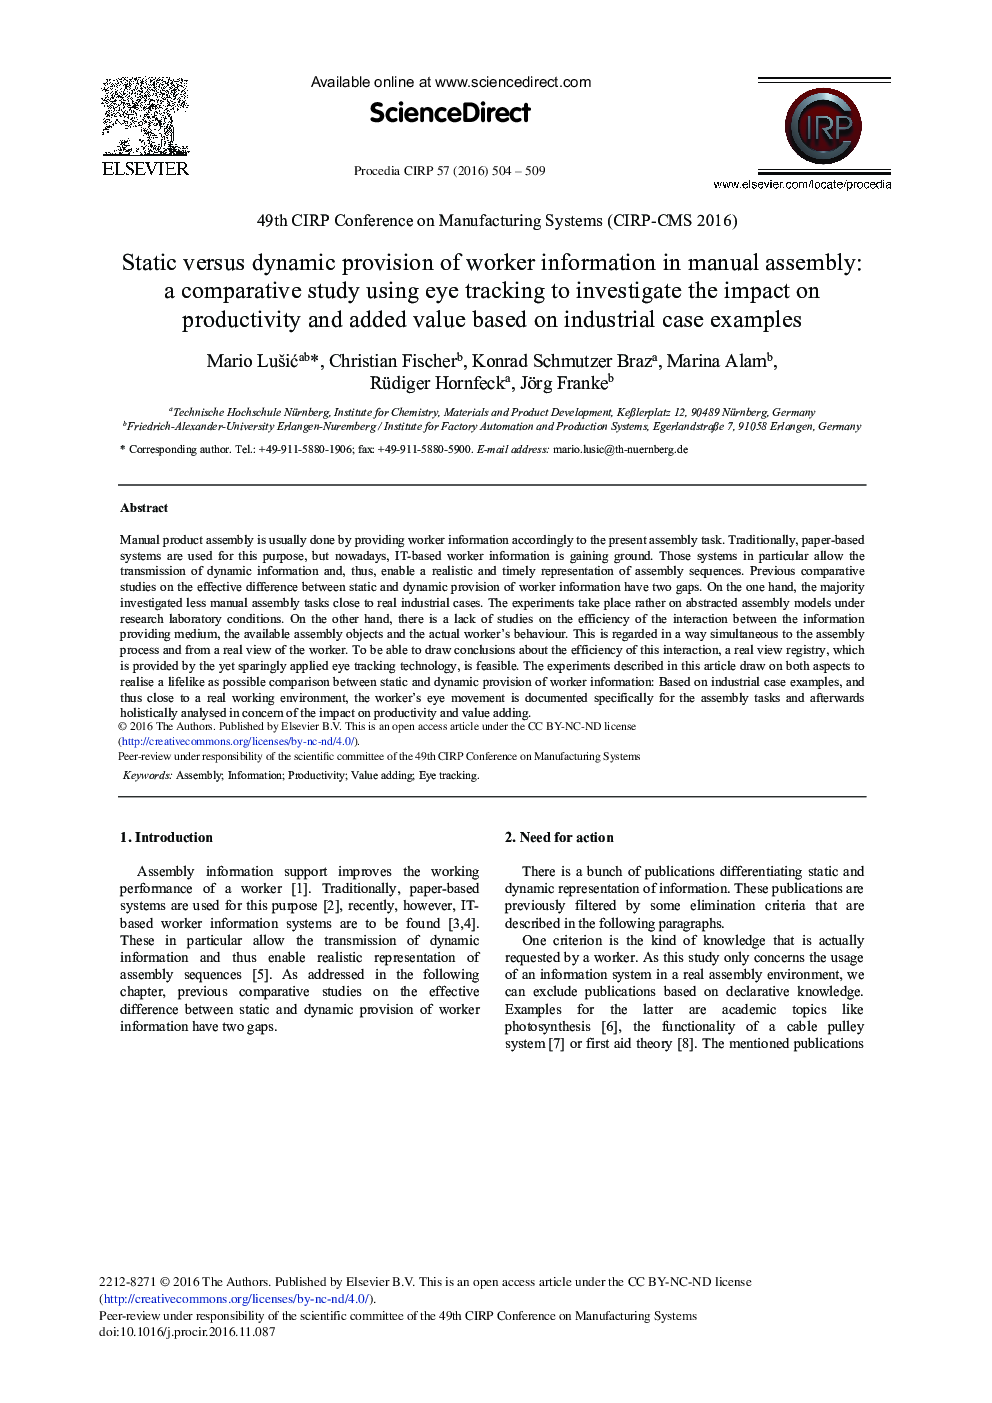 Static Versus Dynamic Provision of Worker Information in Manual Assembly: A Comparative Study Using Eye Tracking to Investigate the Impact on Productivity and Added Value Based on Industrial Case Examples